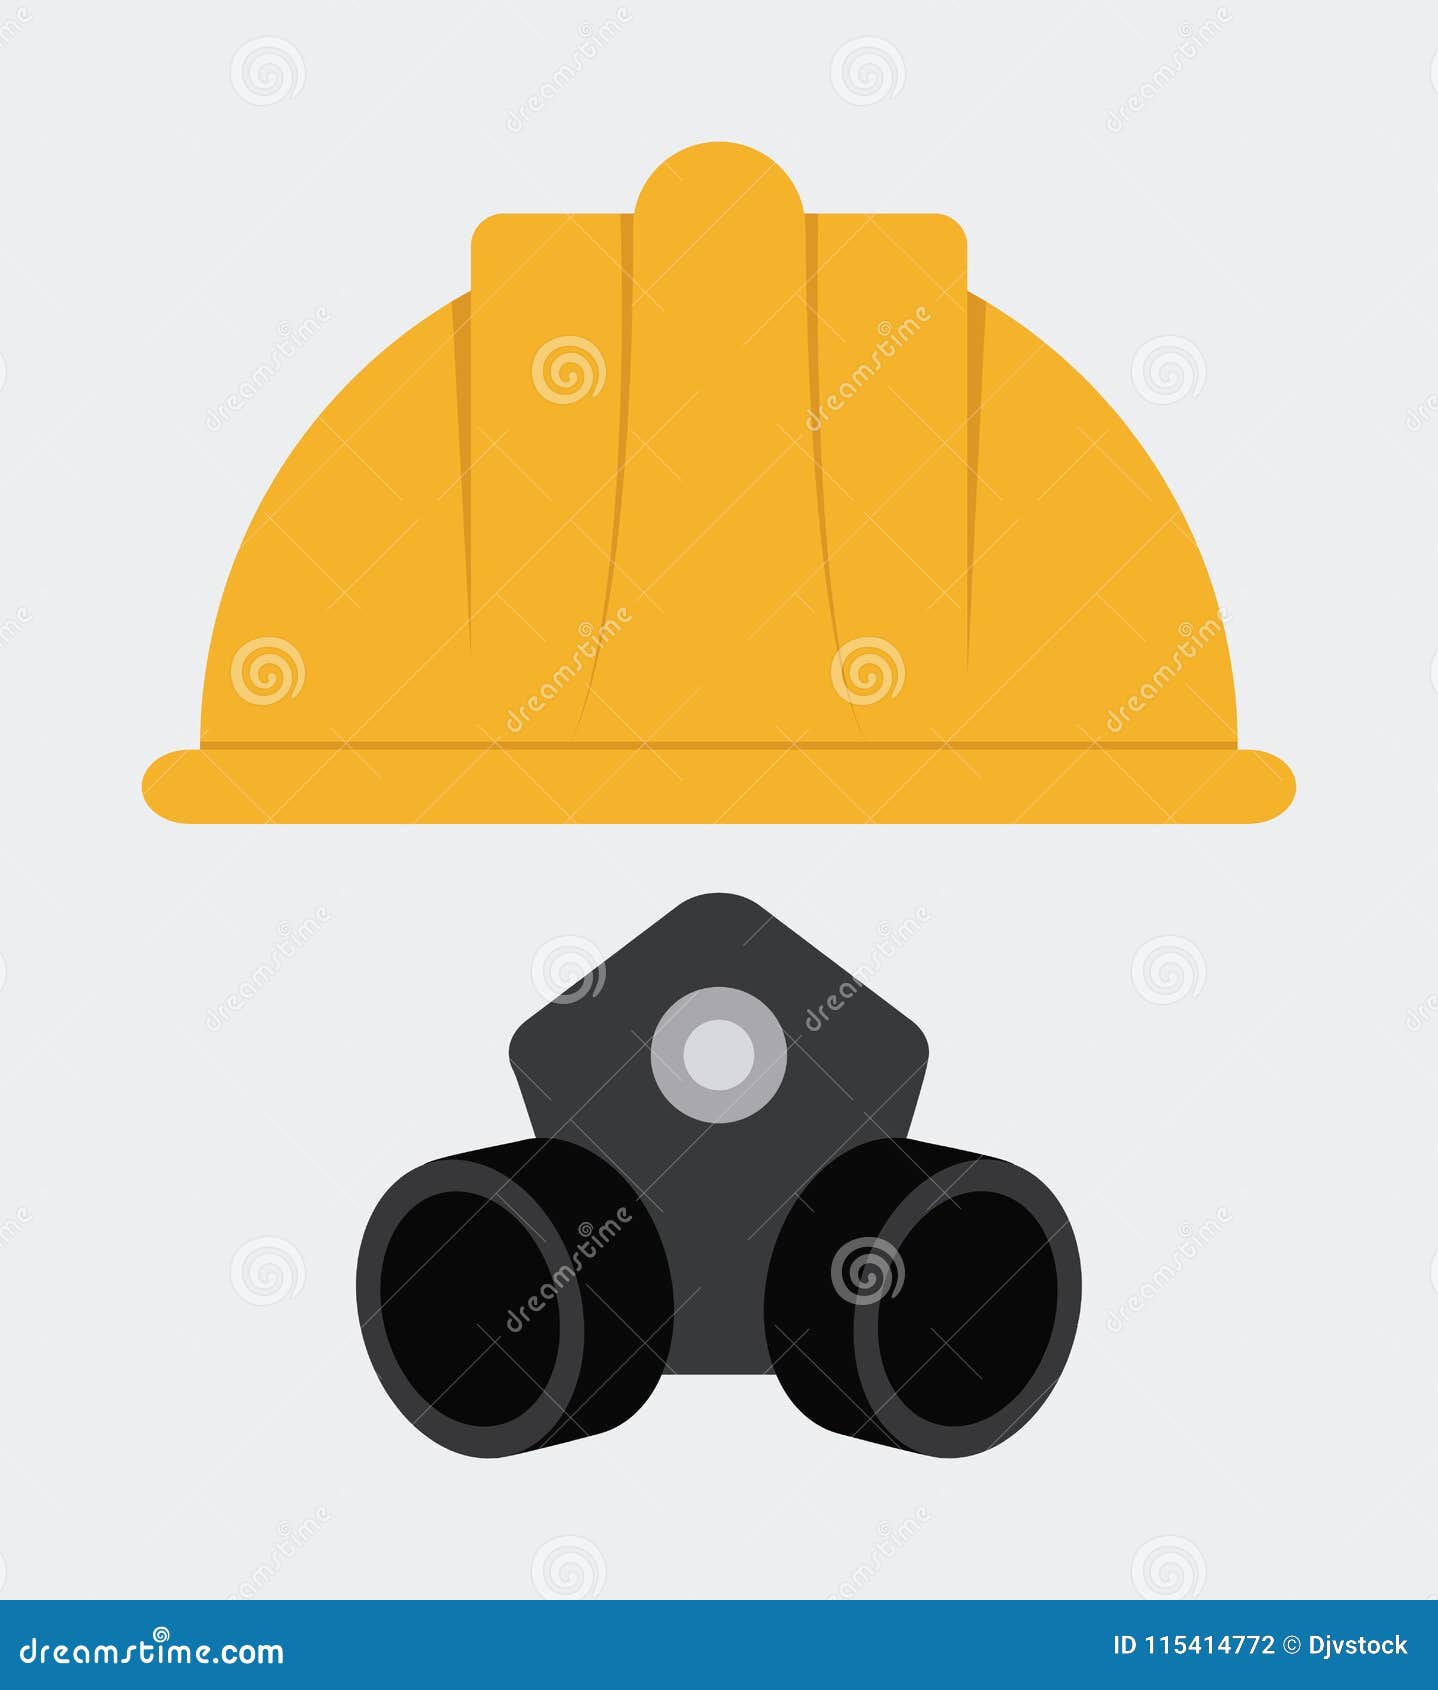 Download Yellow Helmet Mask Icon Vector Graphic Stock Vector Illustration Of Processing Flammable 115414772 PSD Mockup Templates